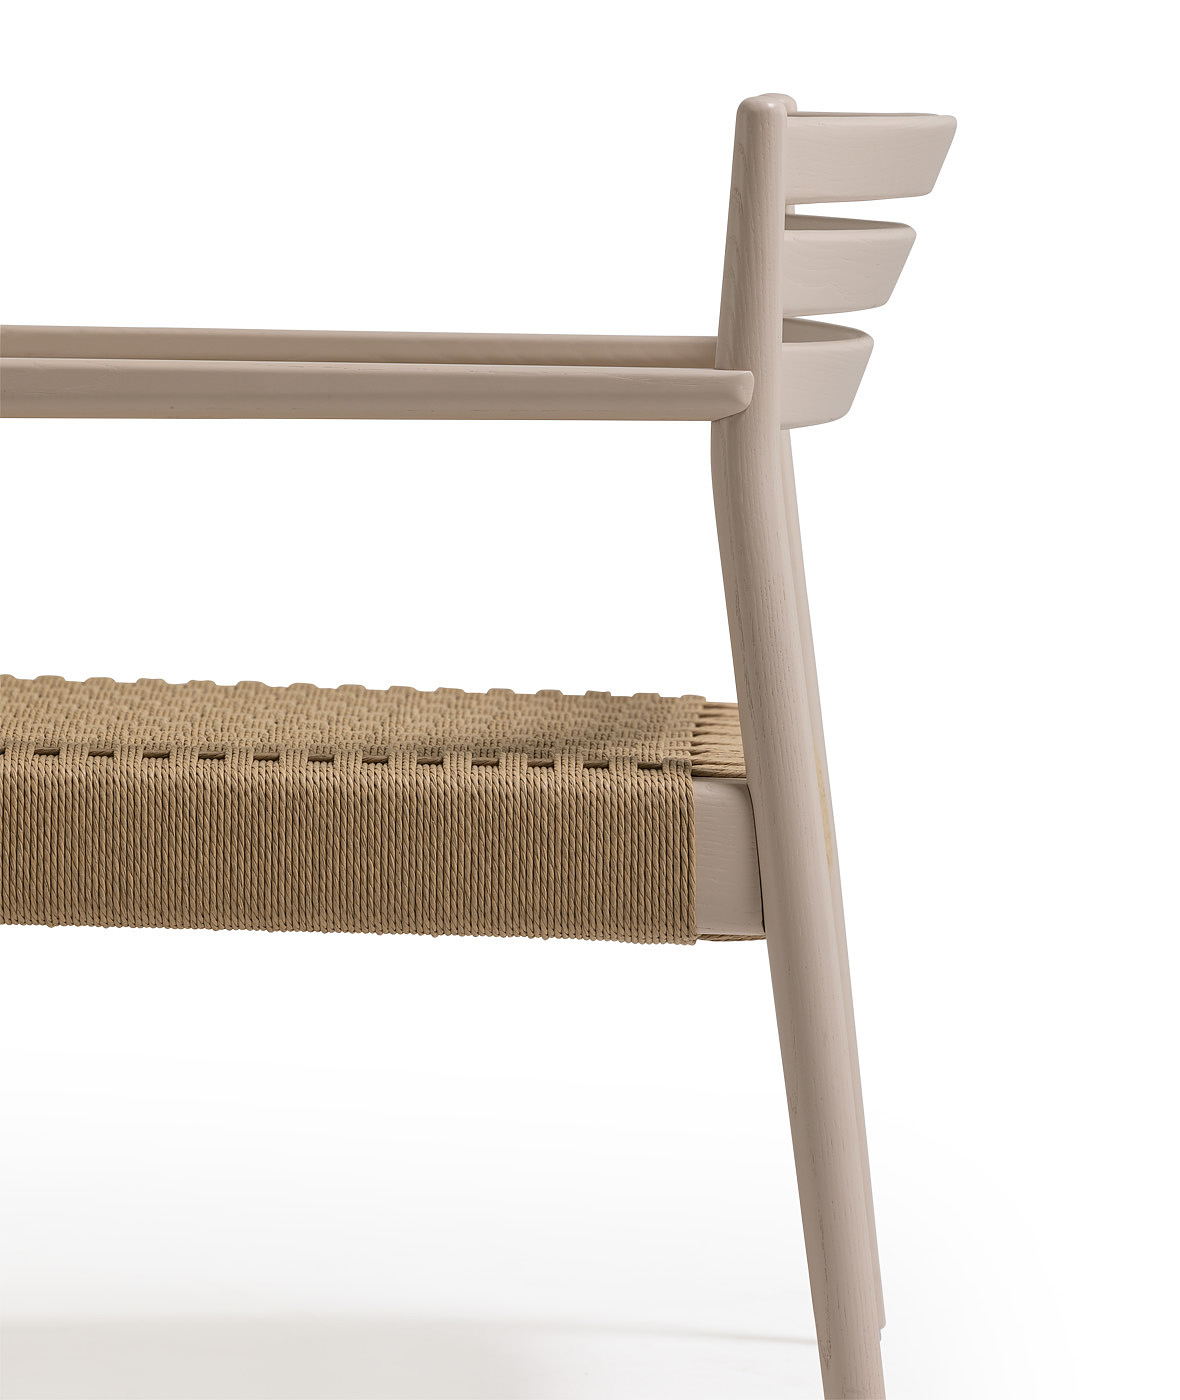 Bogart lounge with armrests and braided rope seat - Vergés